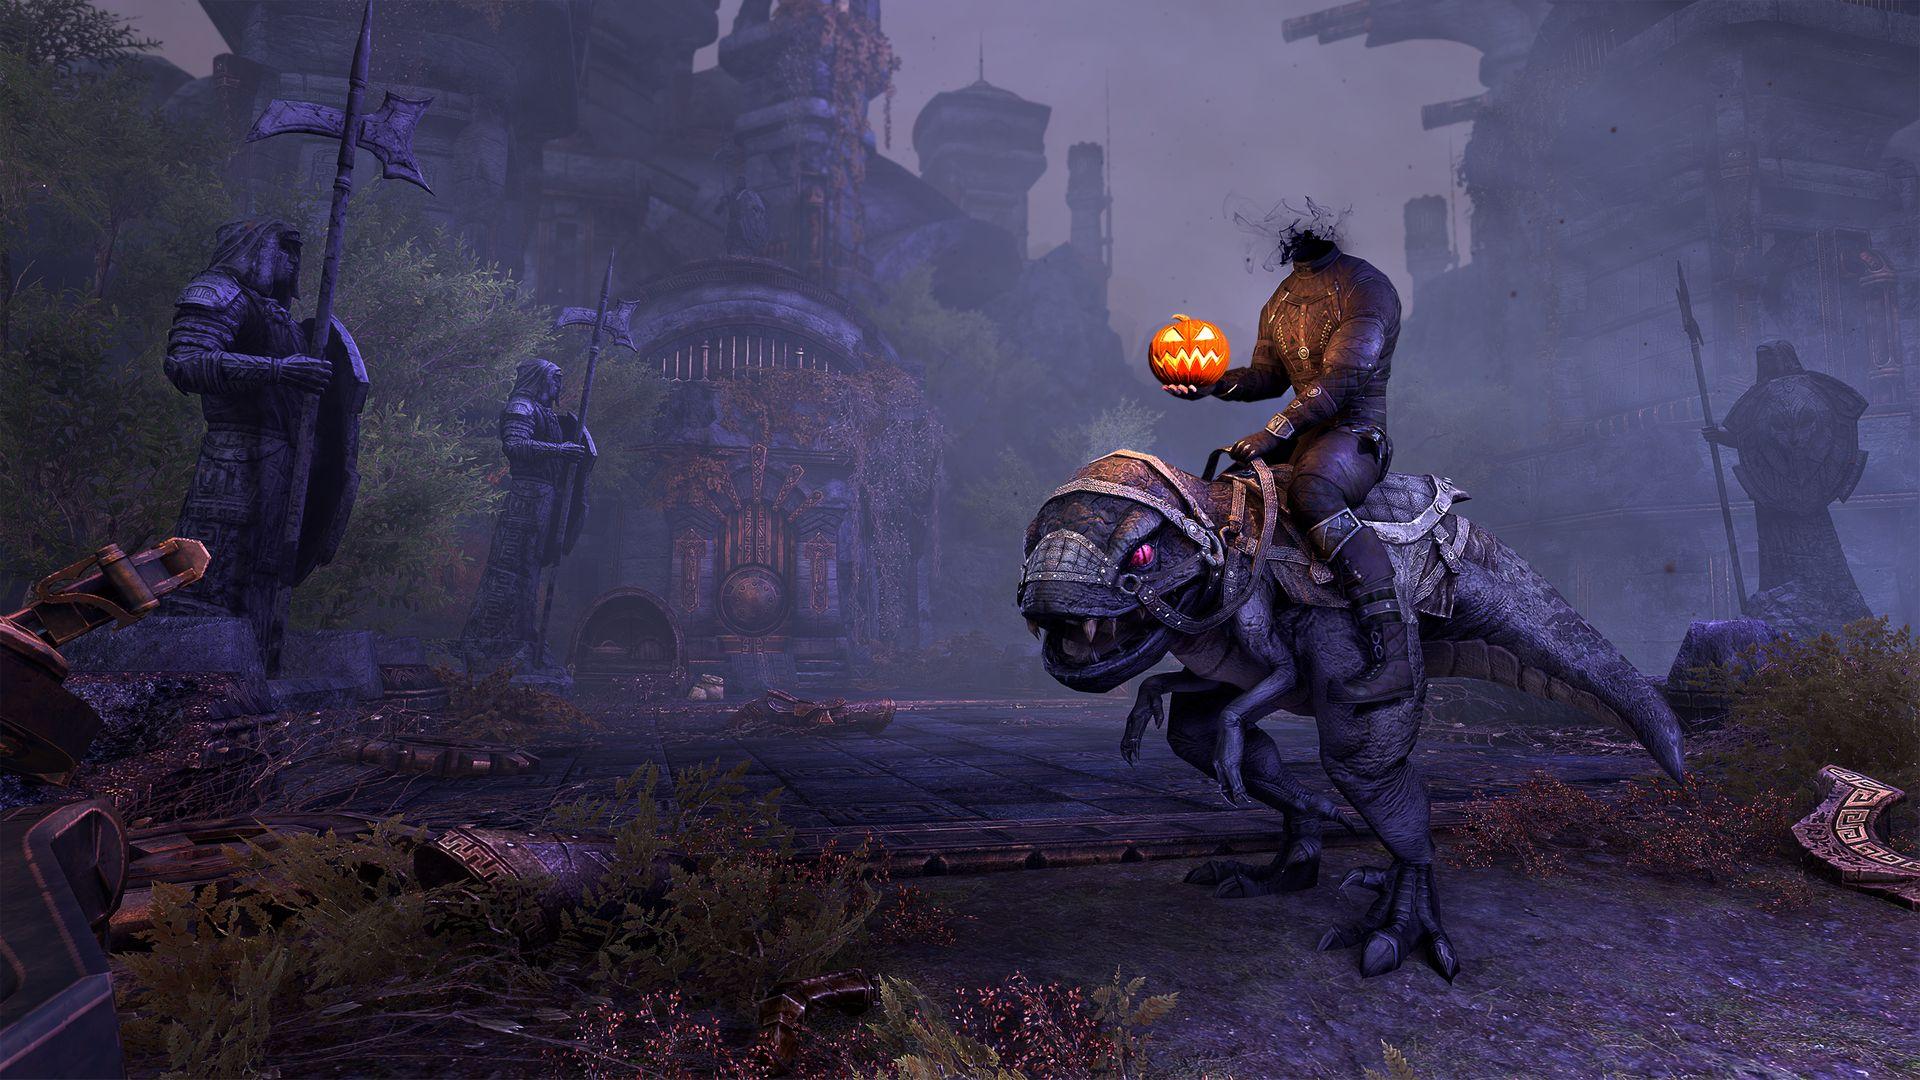 “Hollowjack Crates are now available in the #ESO Crown Store! 